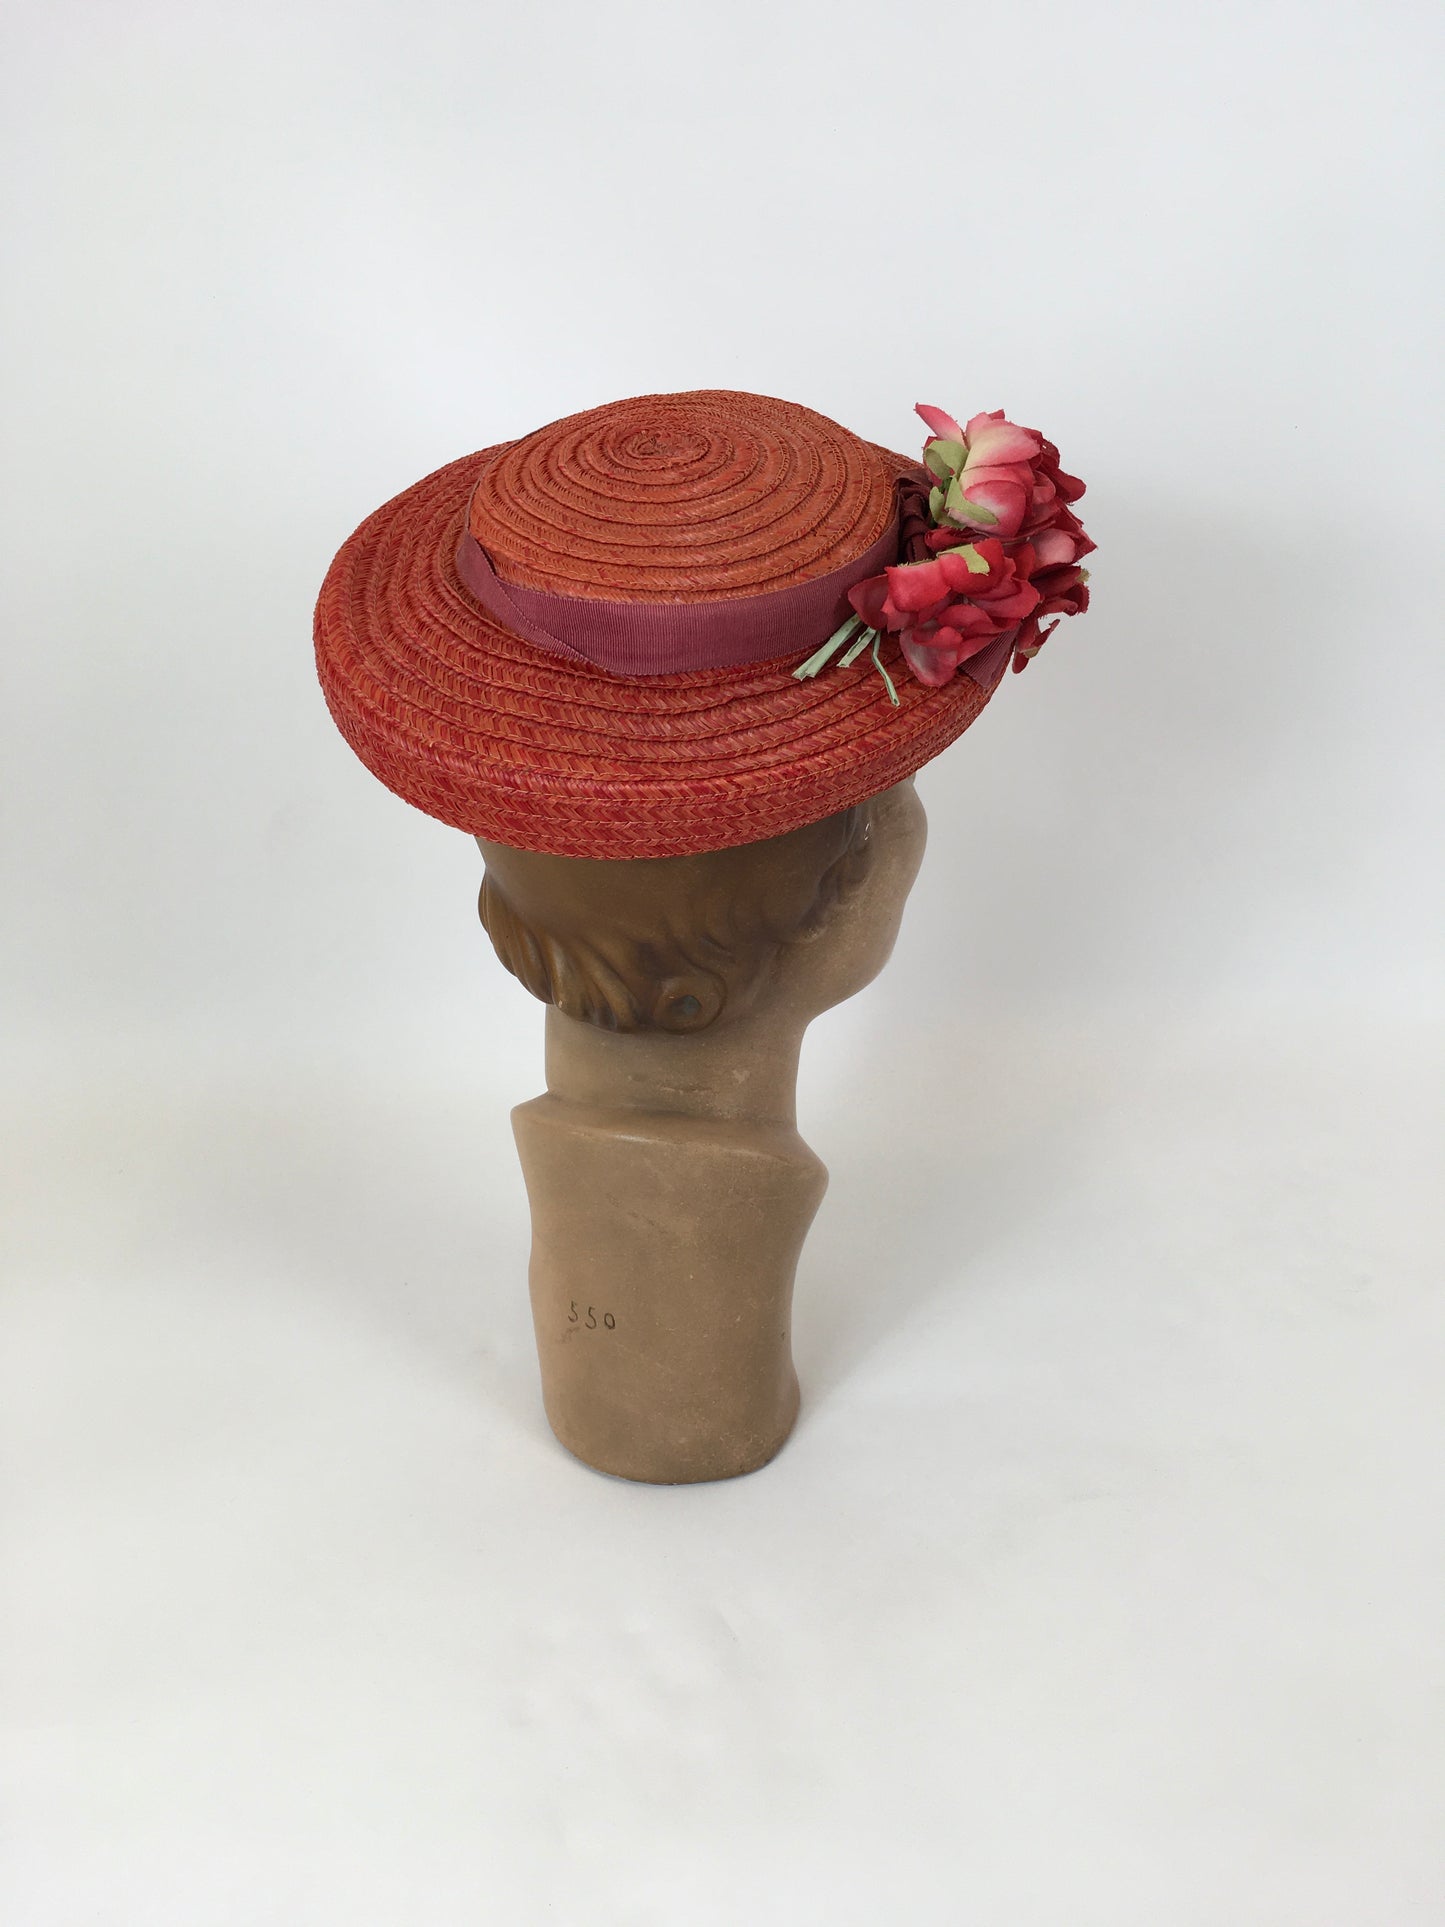 Original 1940’s Darling Straw Hat - In Coral & Red Adorned with Millinery Flora